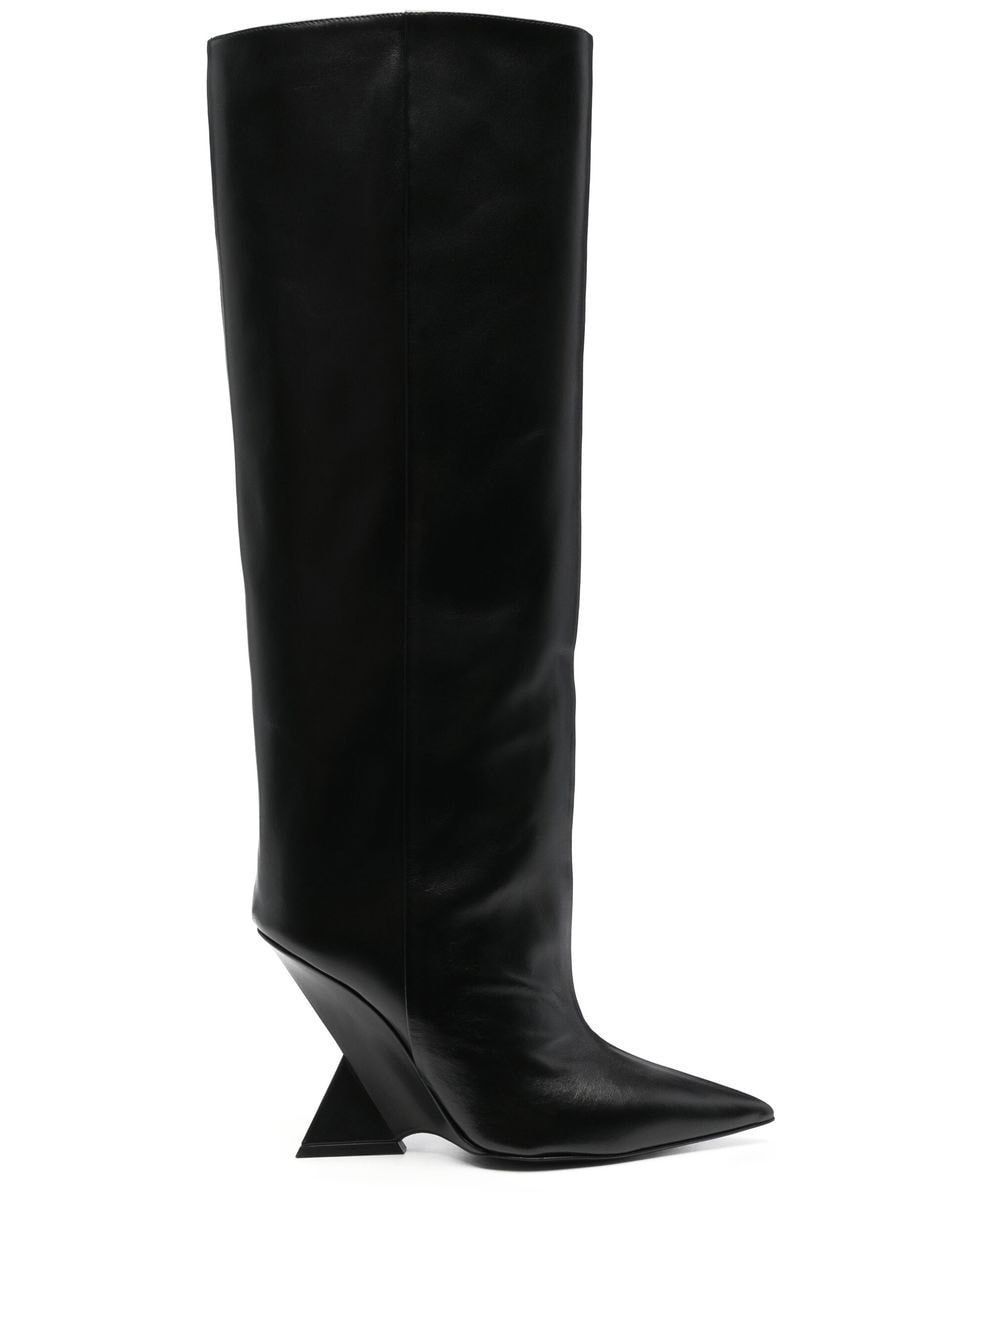 Cheope knee-high 105mm boots - 1